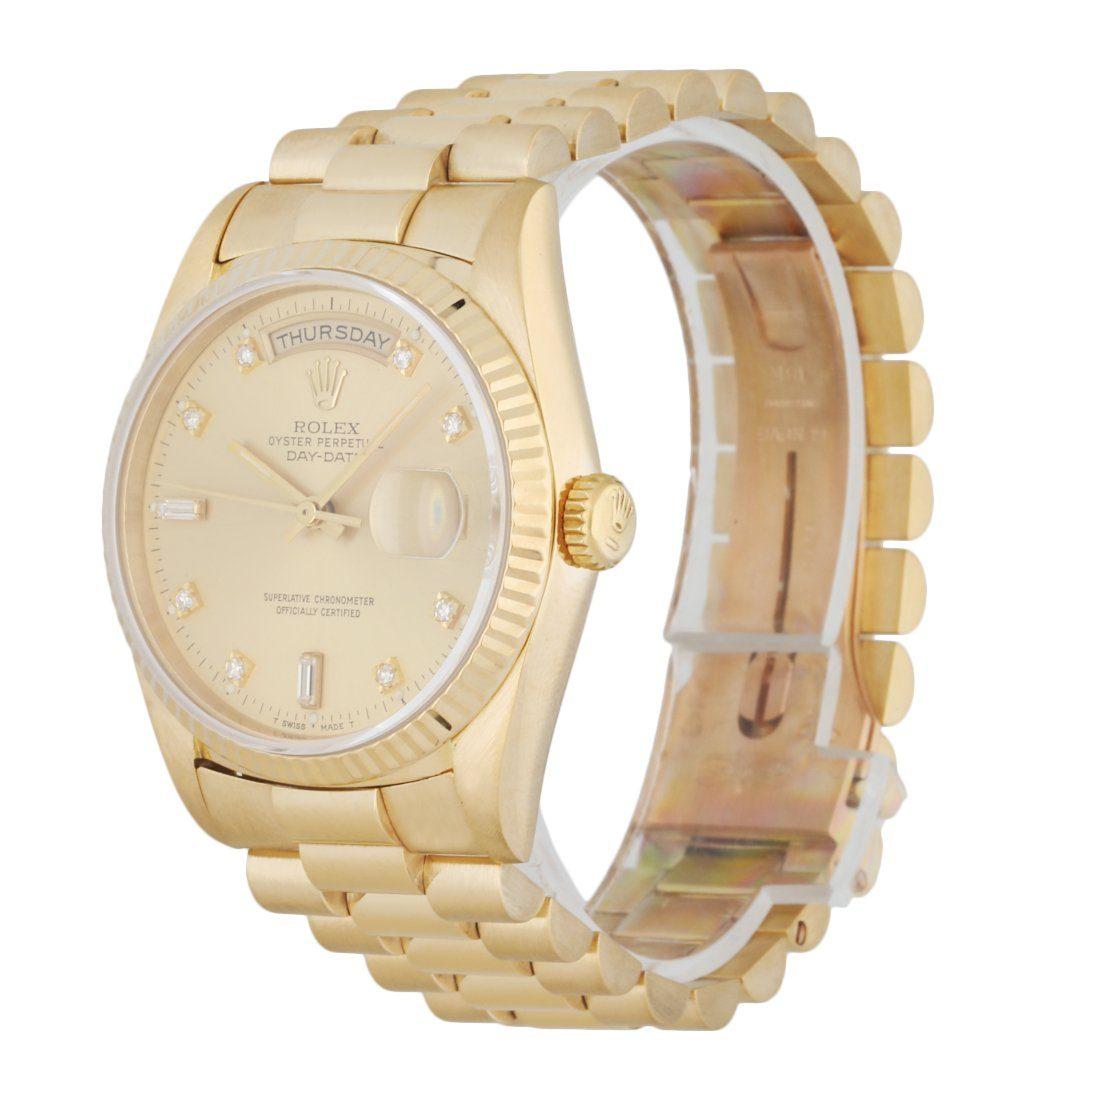 Rolex Day Date 18238 men's watch. 36MM 18K yellow gold case with 18K yellow gold fluted bezel. Champagne dial with gold luminous hands and factory diamond hour marker. Date display at 3 o'clock position & day display at 12 o'clock position. 18K